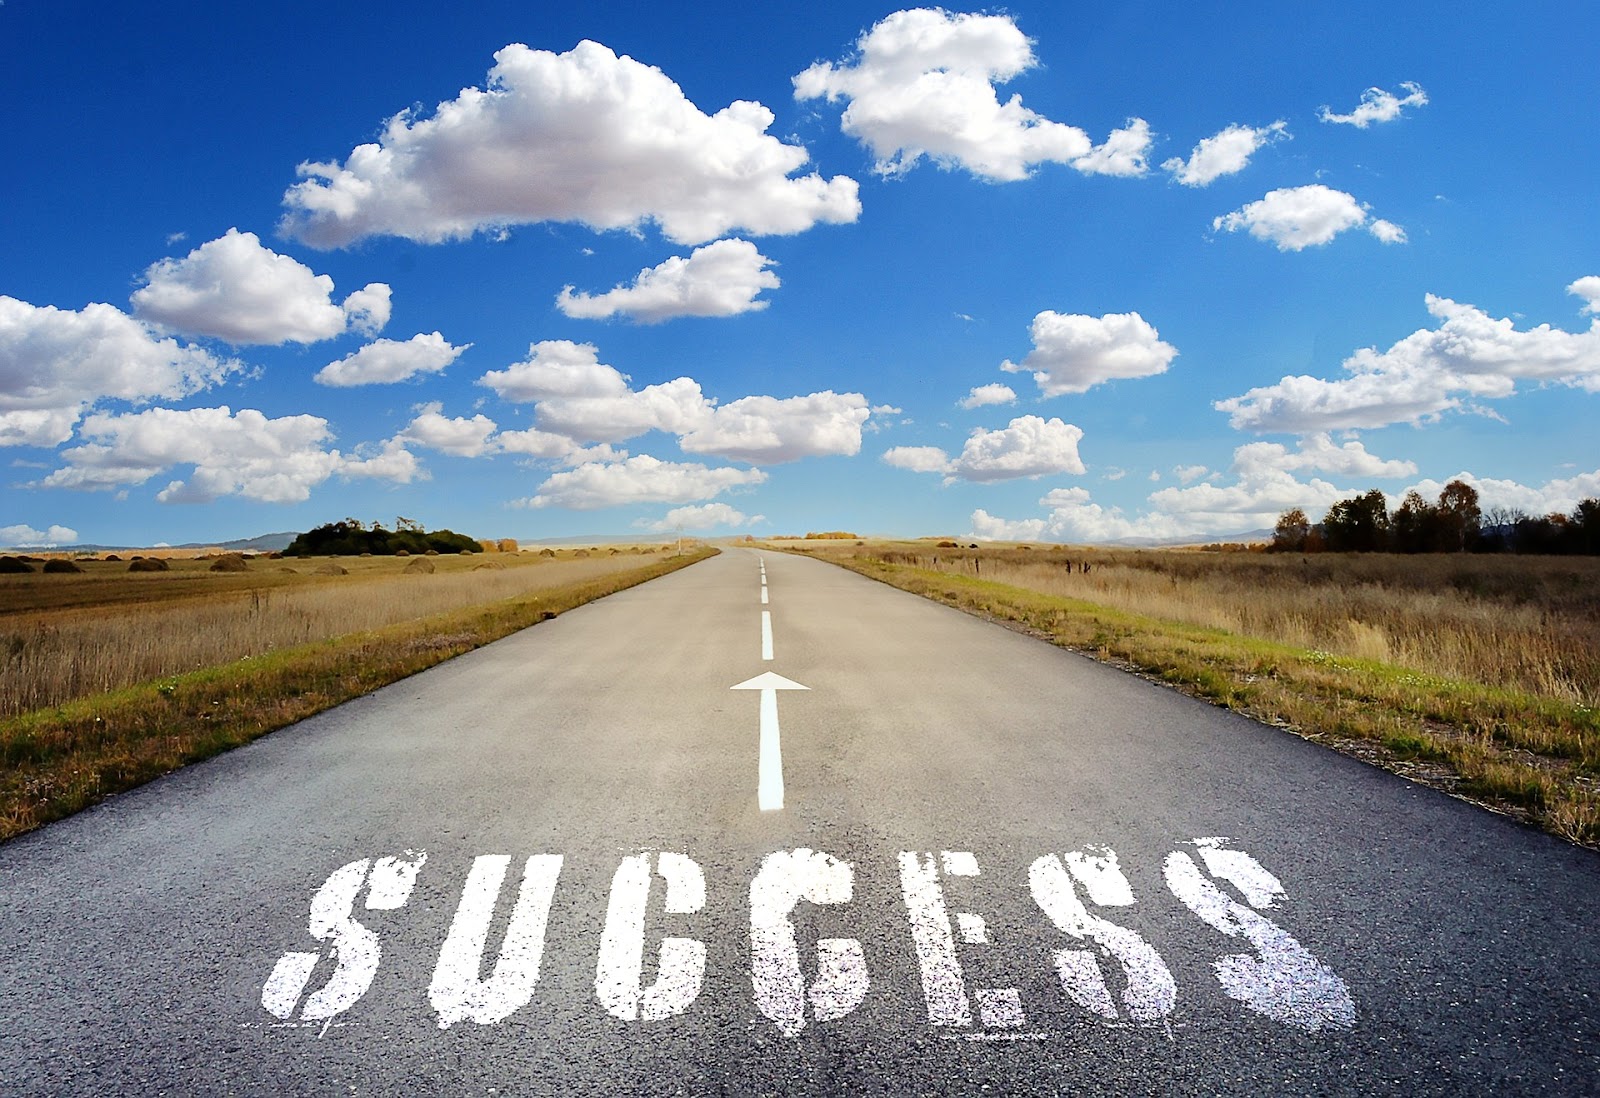 A picture of a blue sky with white scattered white clouds, with a straight road heading off into the distance, with the word 'success' written on the road.
